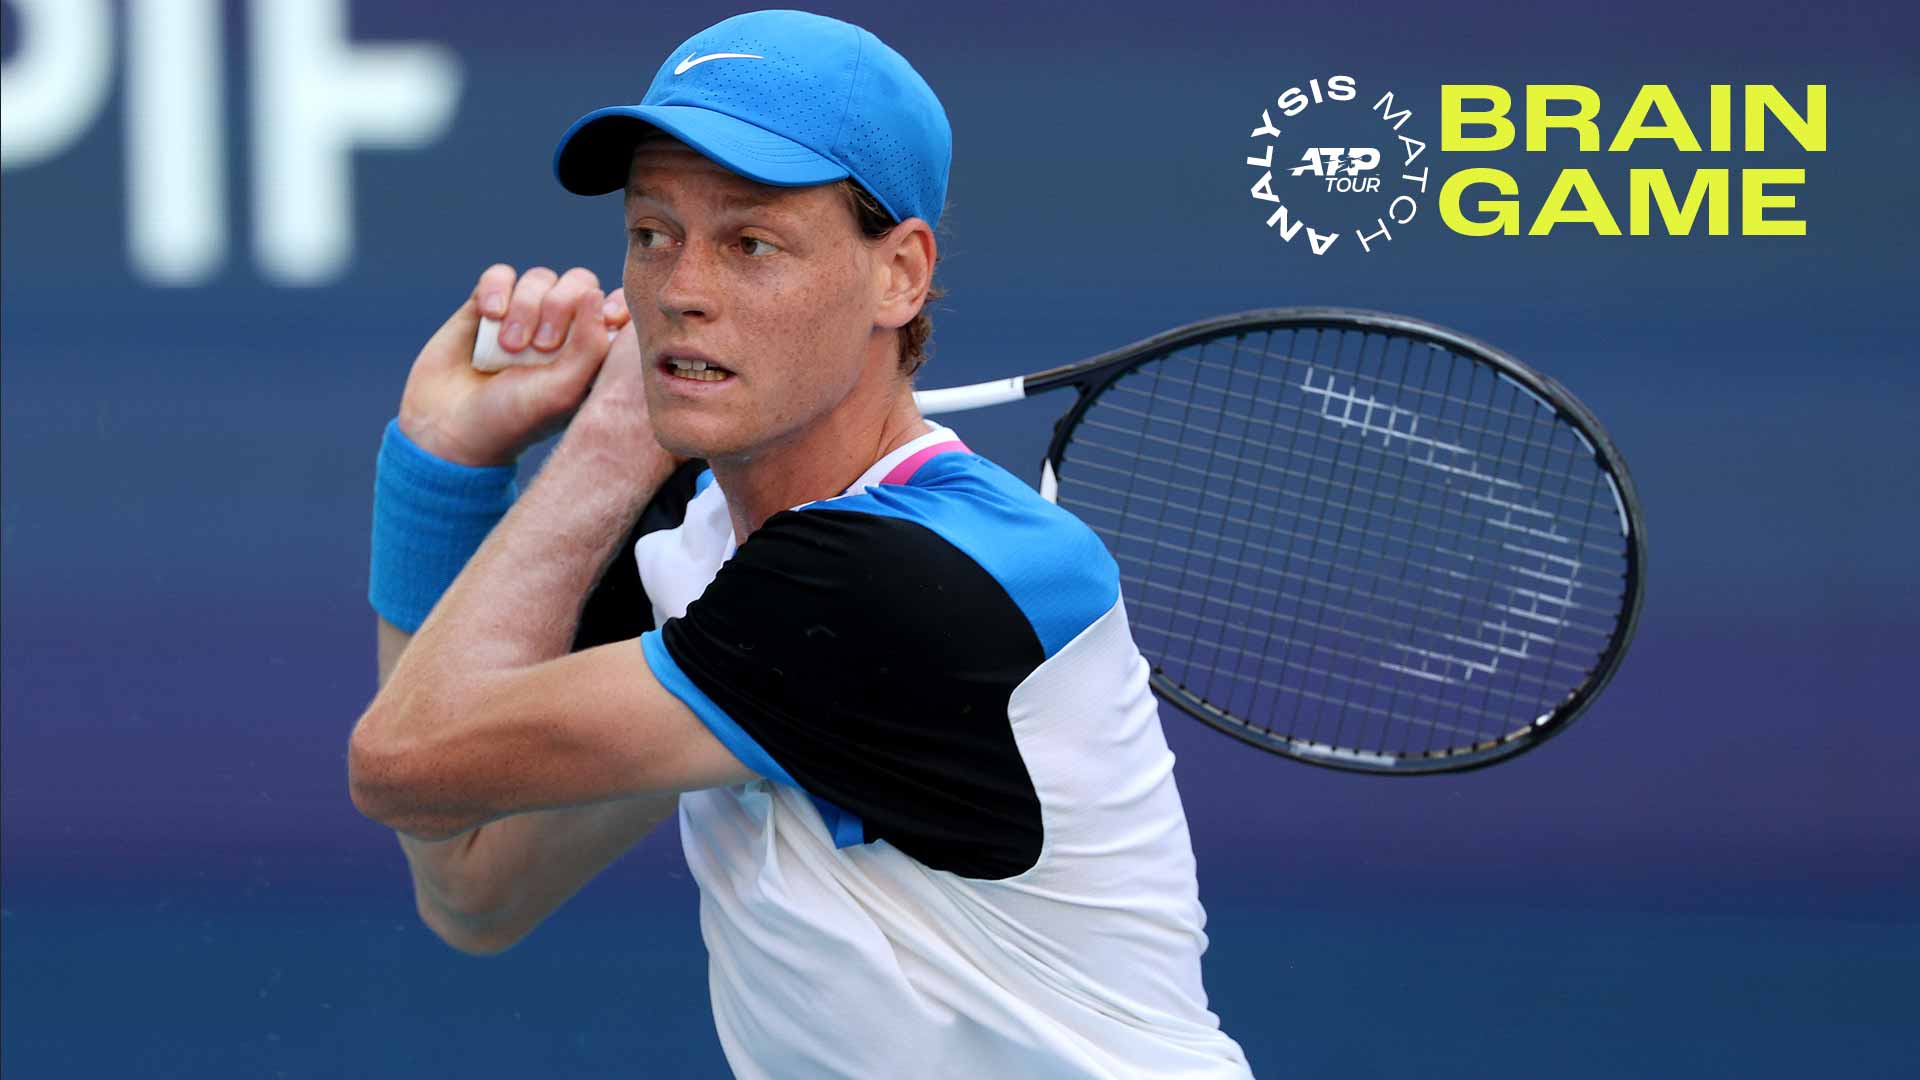 Jannik Sinner uses his backhand dominance to defeat Grigor Dimitrov with the loss of just four games on Sunday.